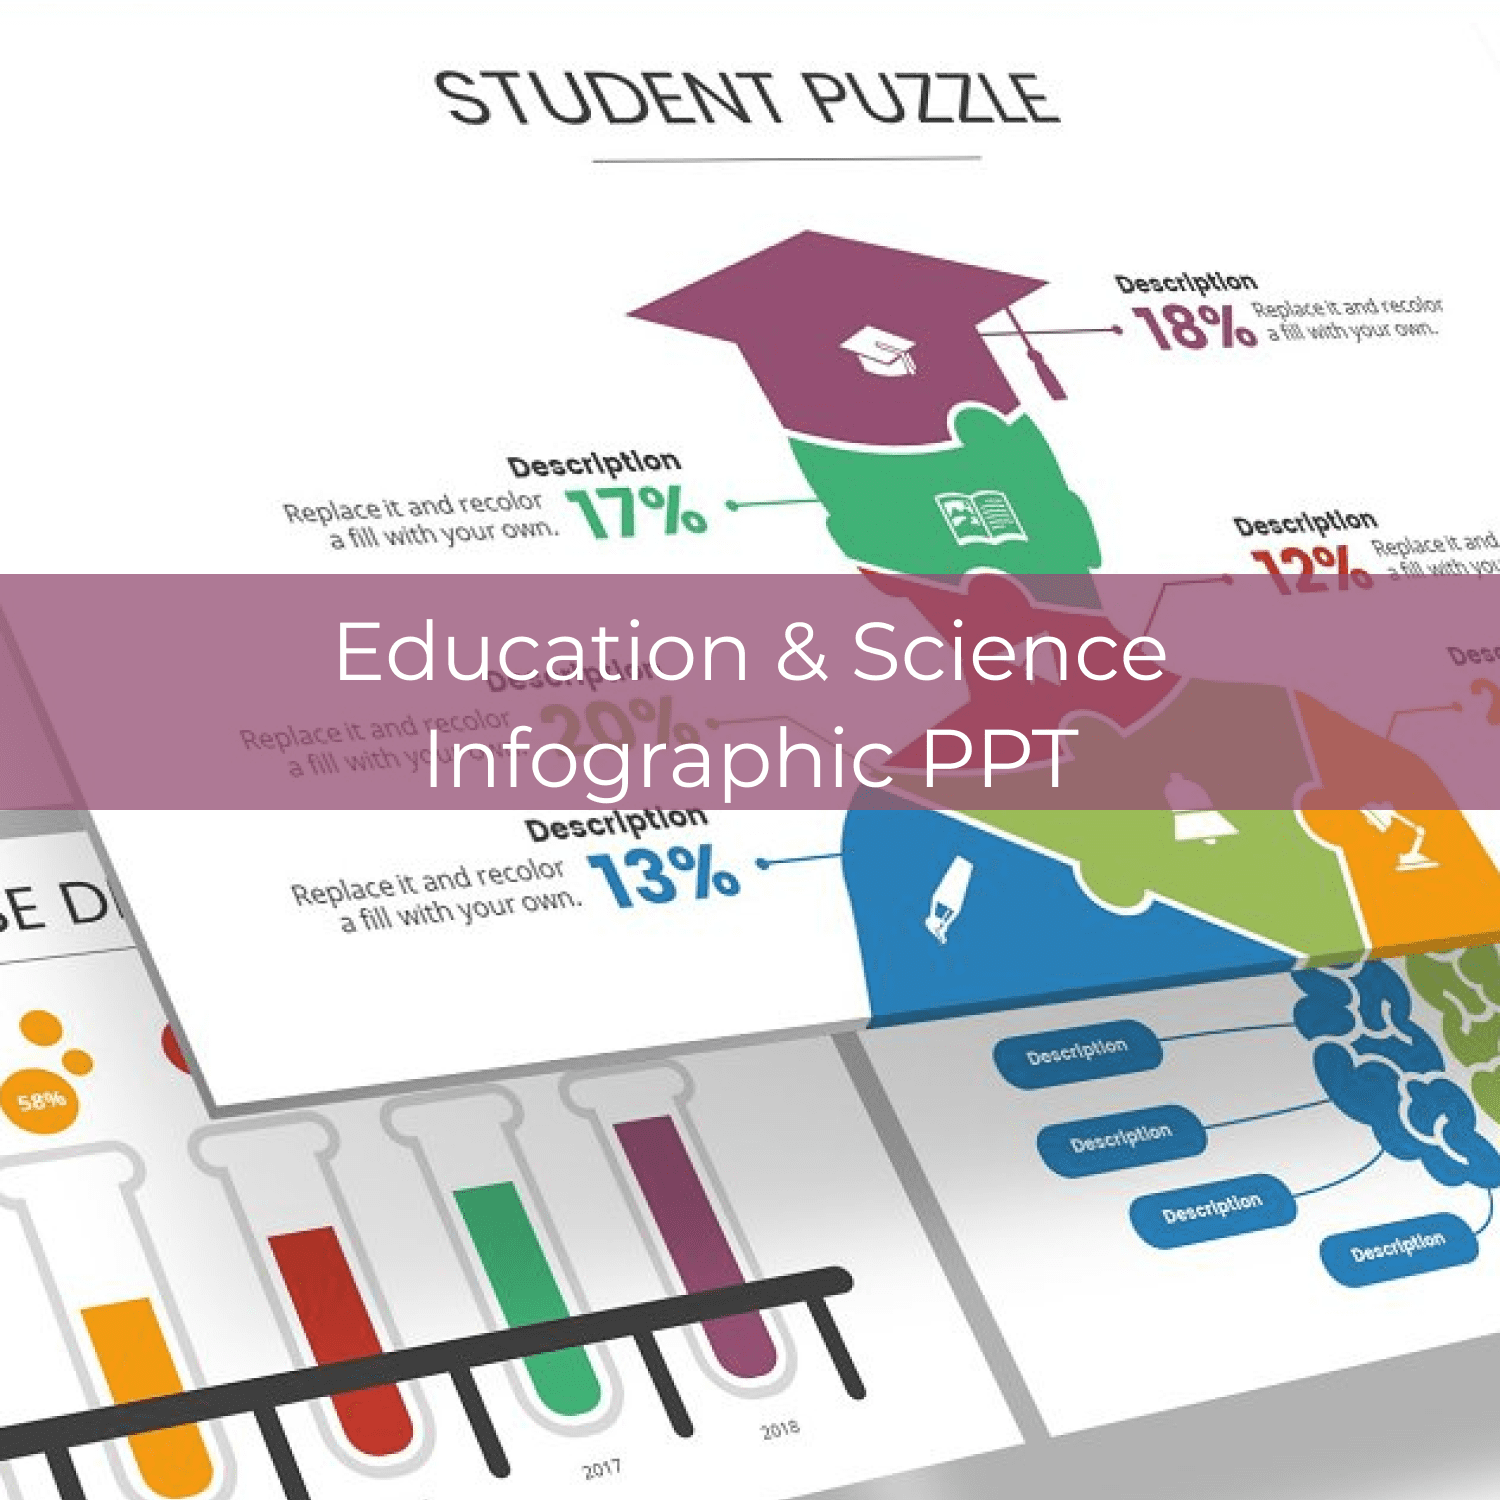 education science infographic ppt preview image.